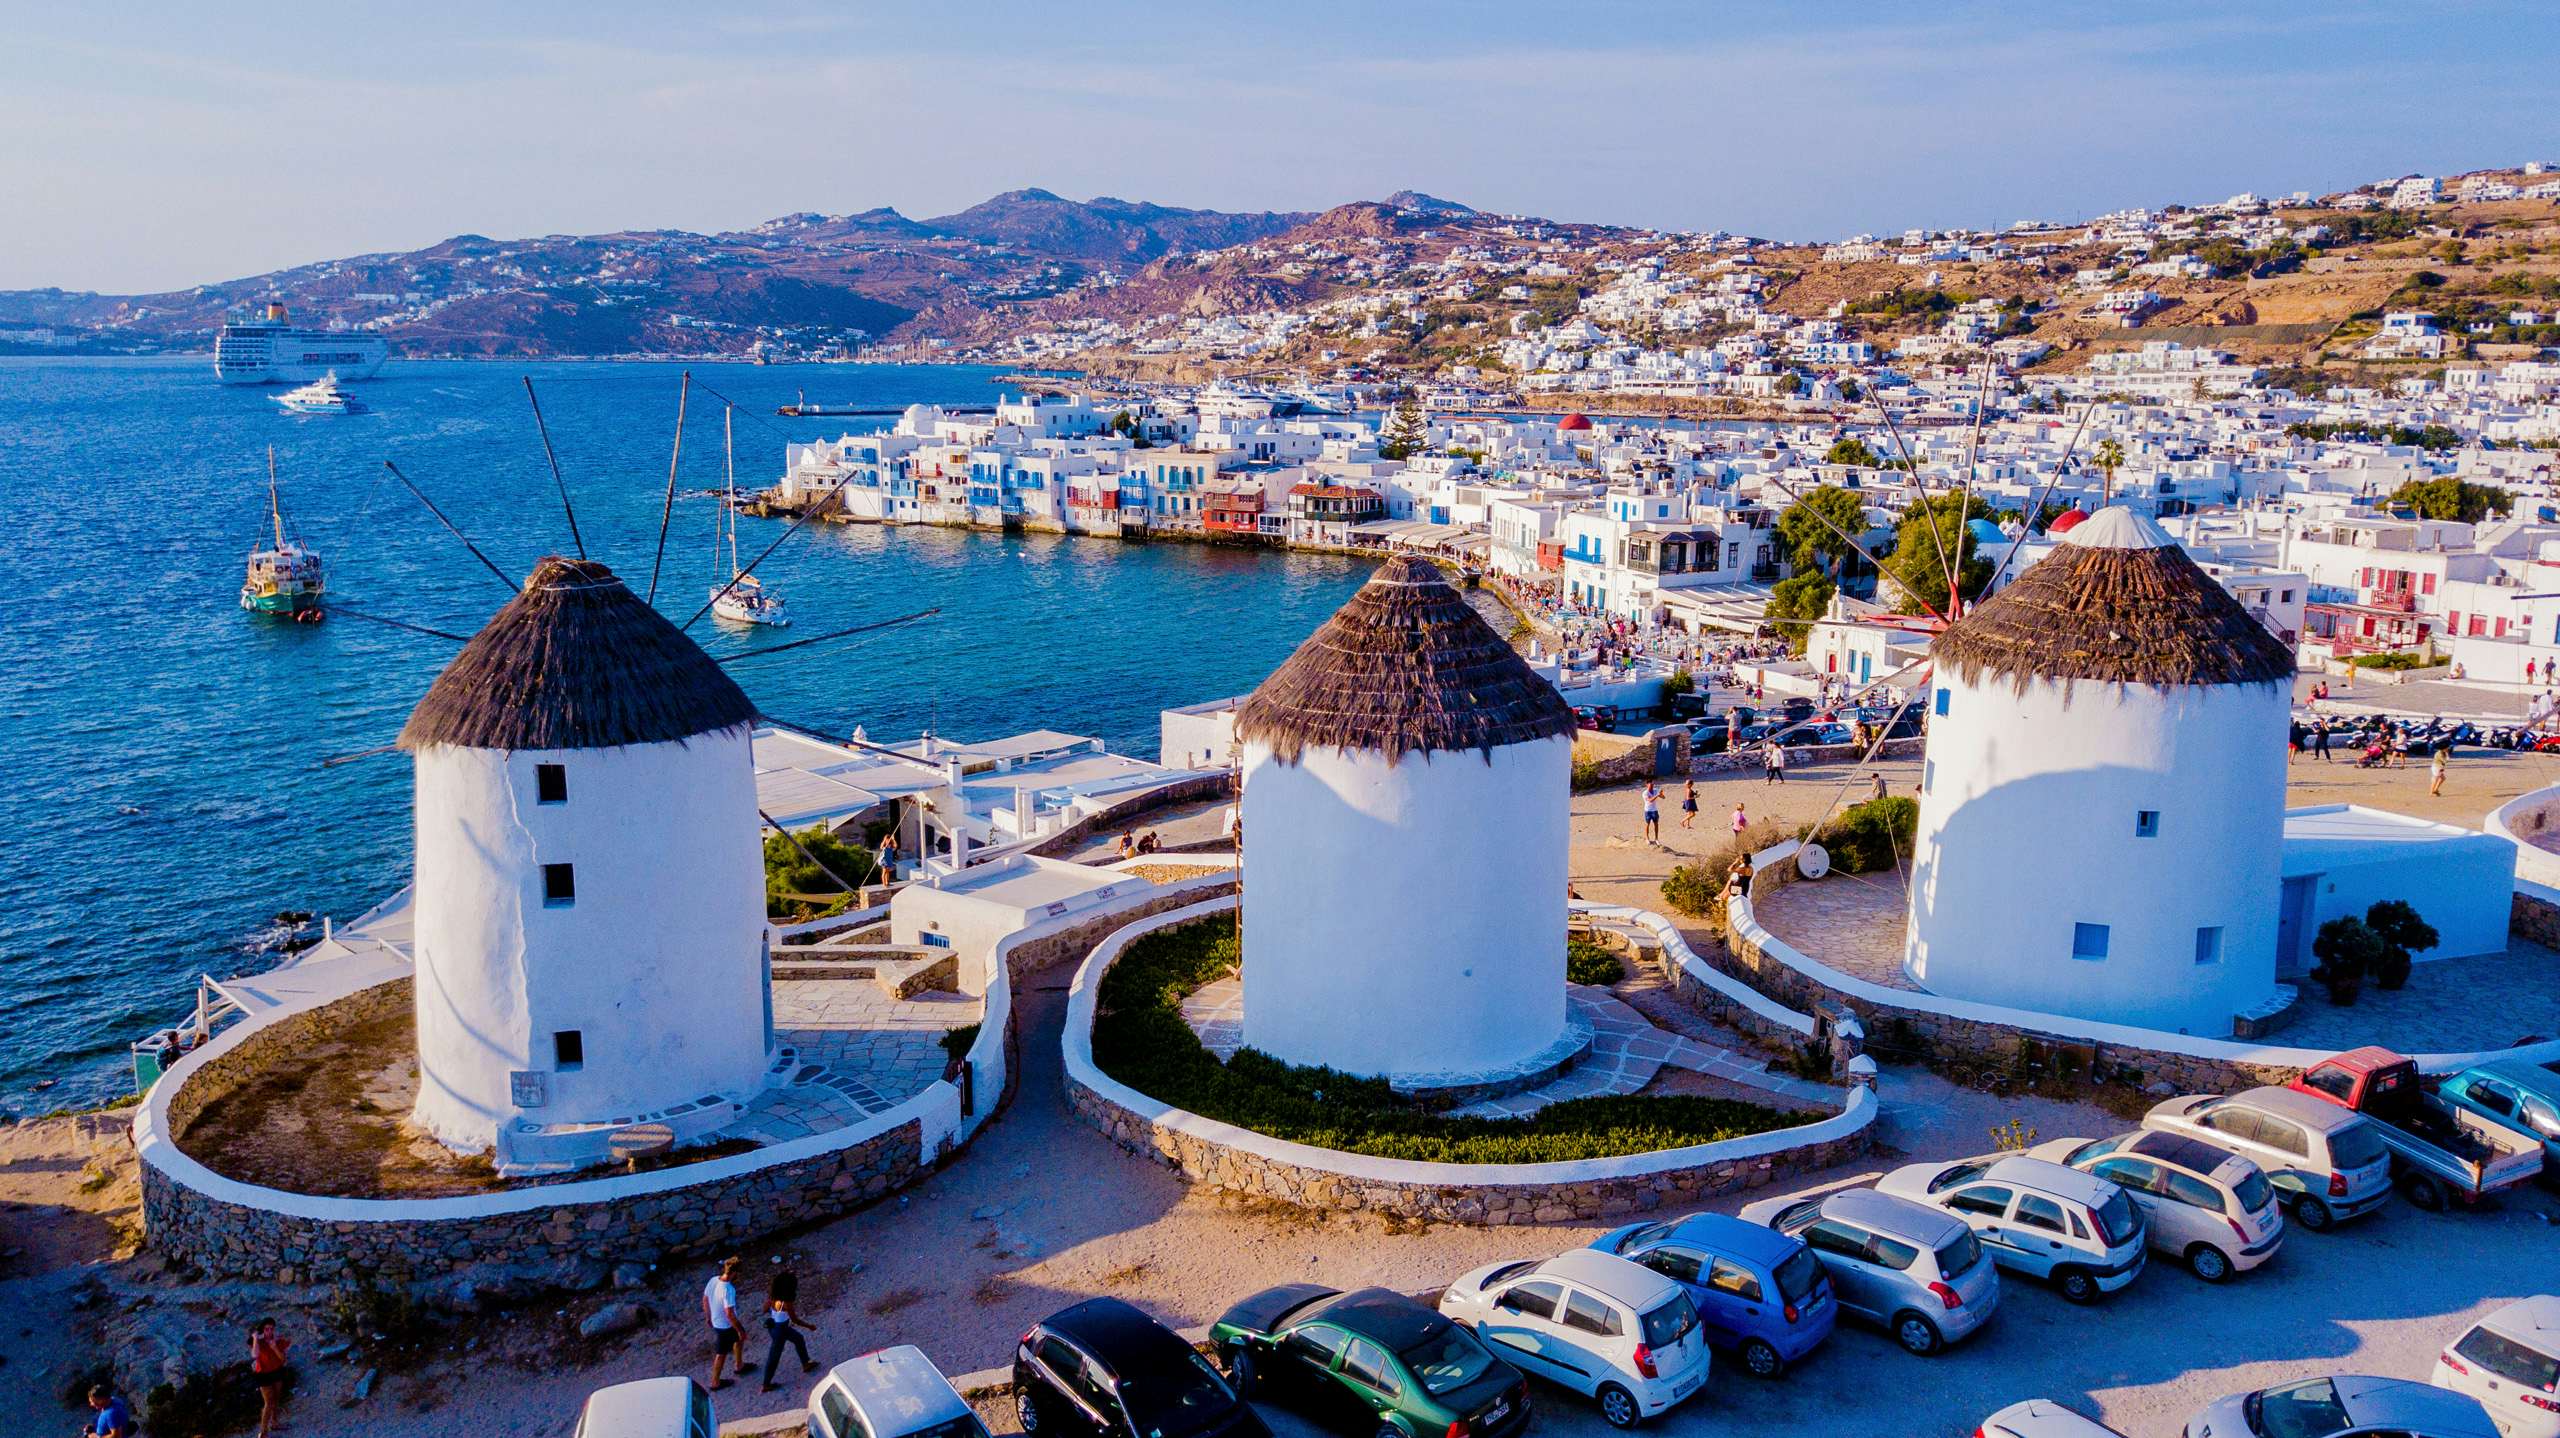 The famous windmills of Mykonos overlooking the harbor, a signature sight on a luxury Cyclades yacht journey.